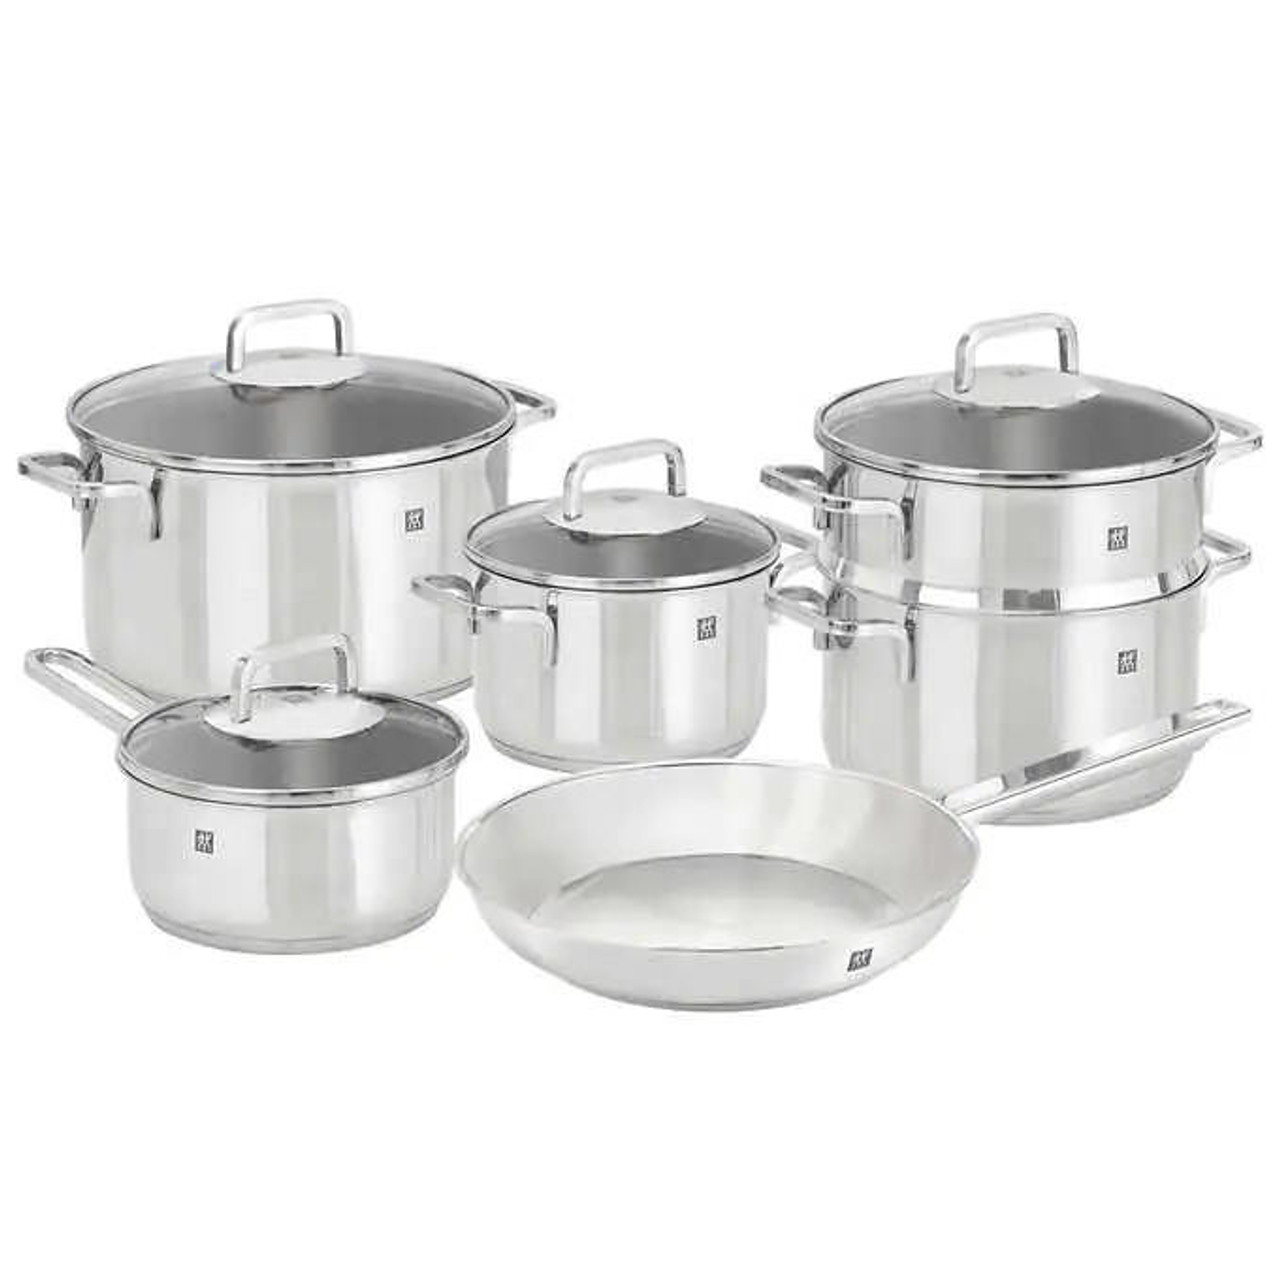 https://cdn11.bigcommerce.com/s-g5ygv2at8j/images/stencil/1280x1280/products/13654/30304/a2zchef-zwilling-quadro-cookware-set-10-piece__30497.1692707601.jpg?c=1